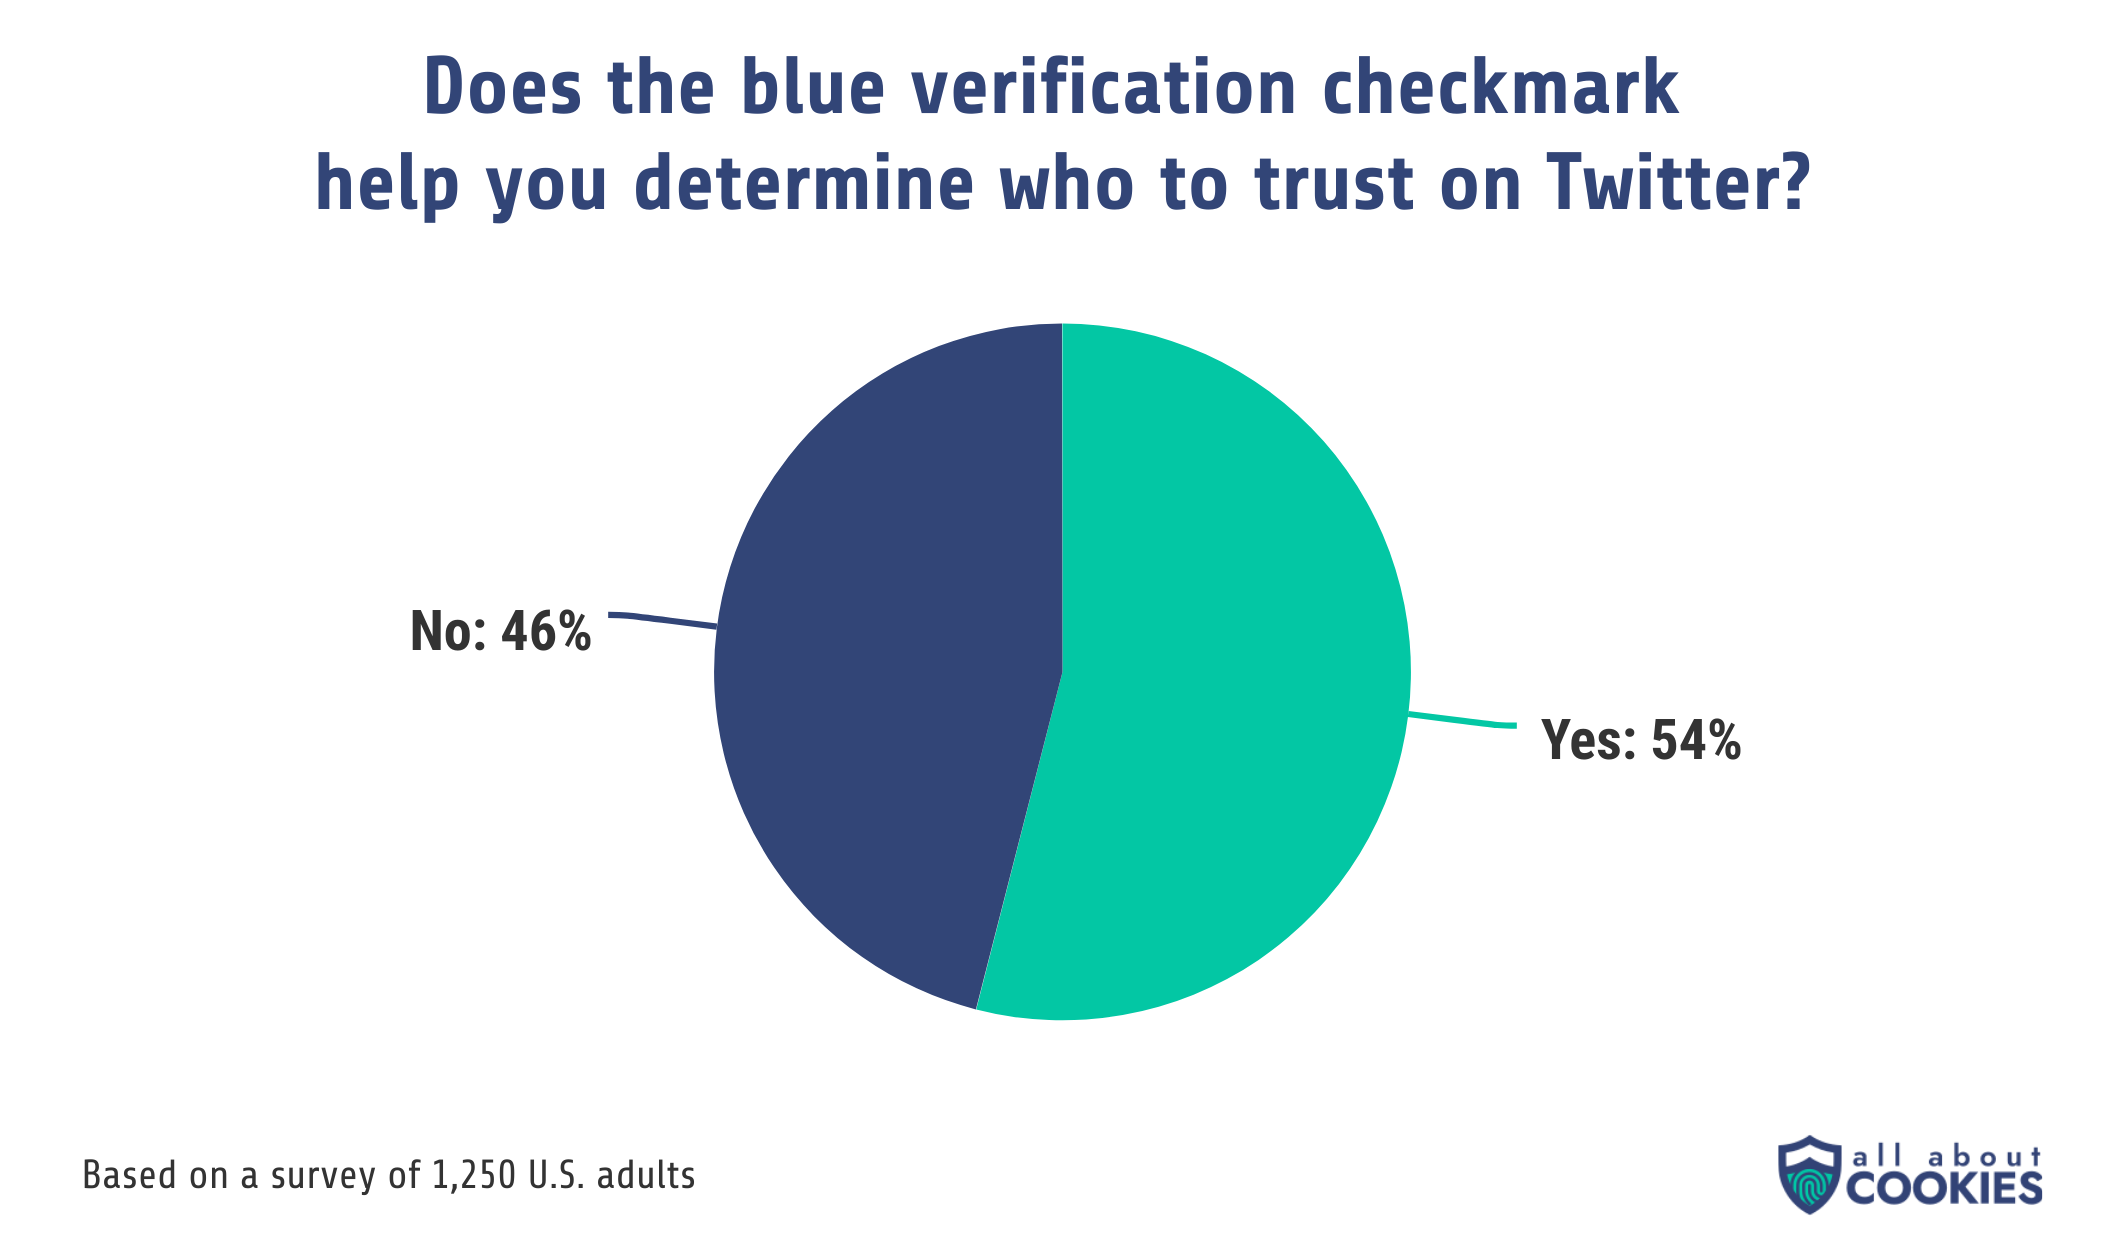 A small majority of U.S. adults say the Twitter verification checkmark helps them determine which accounts to trust.